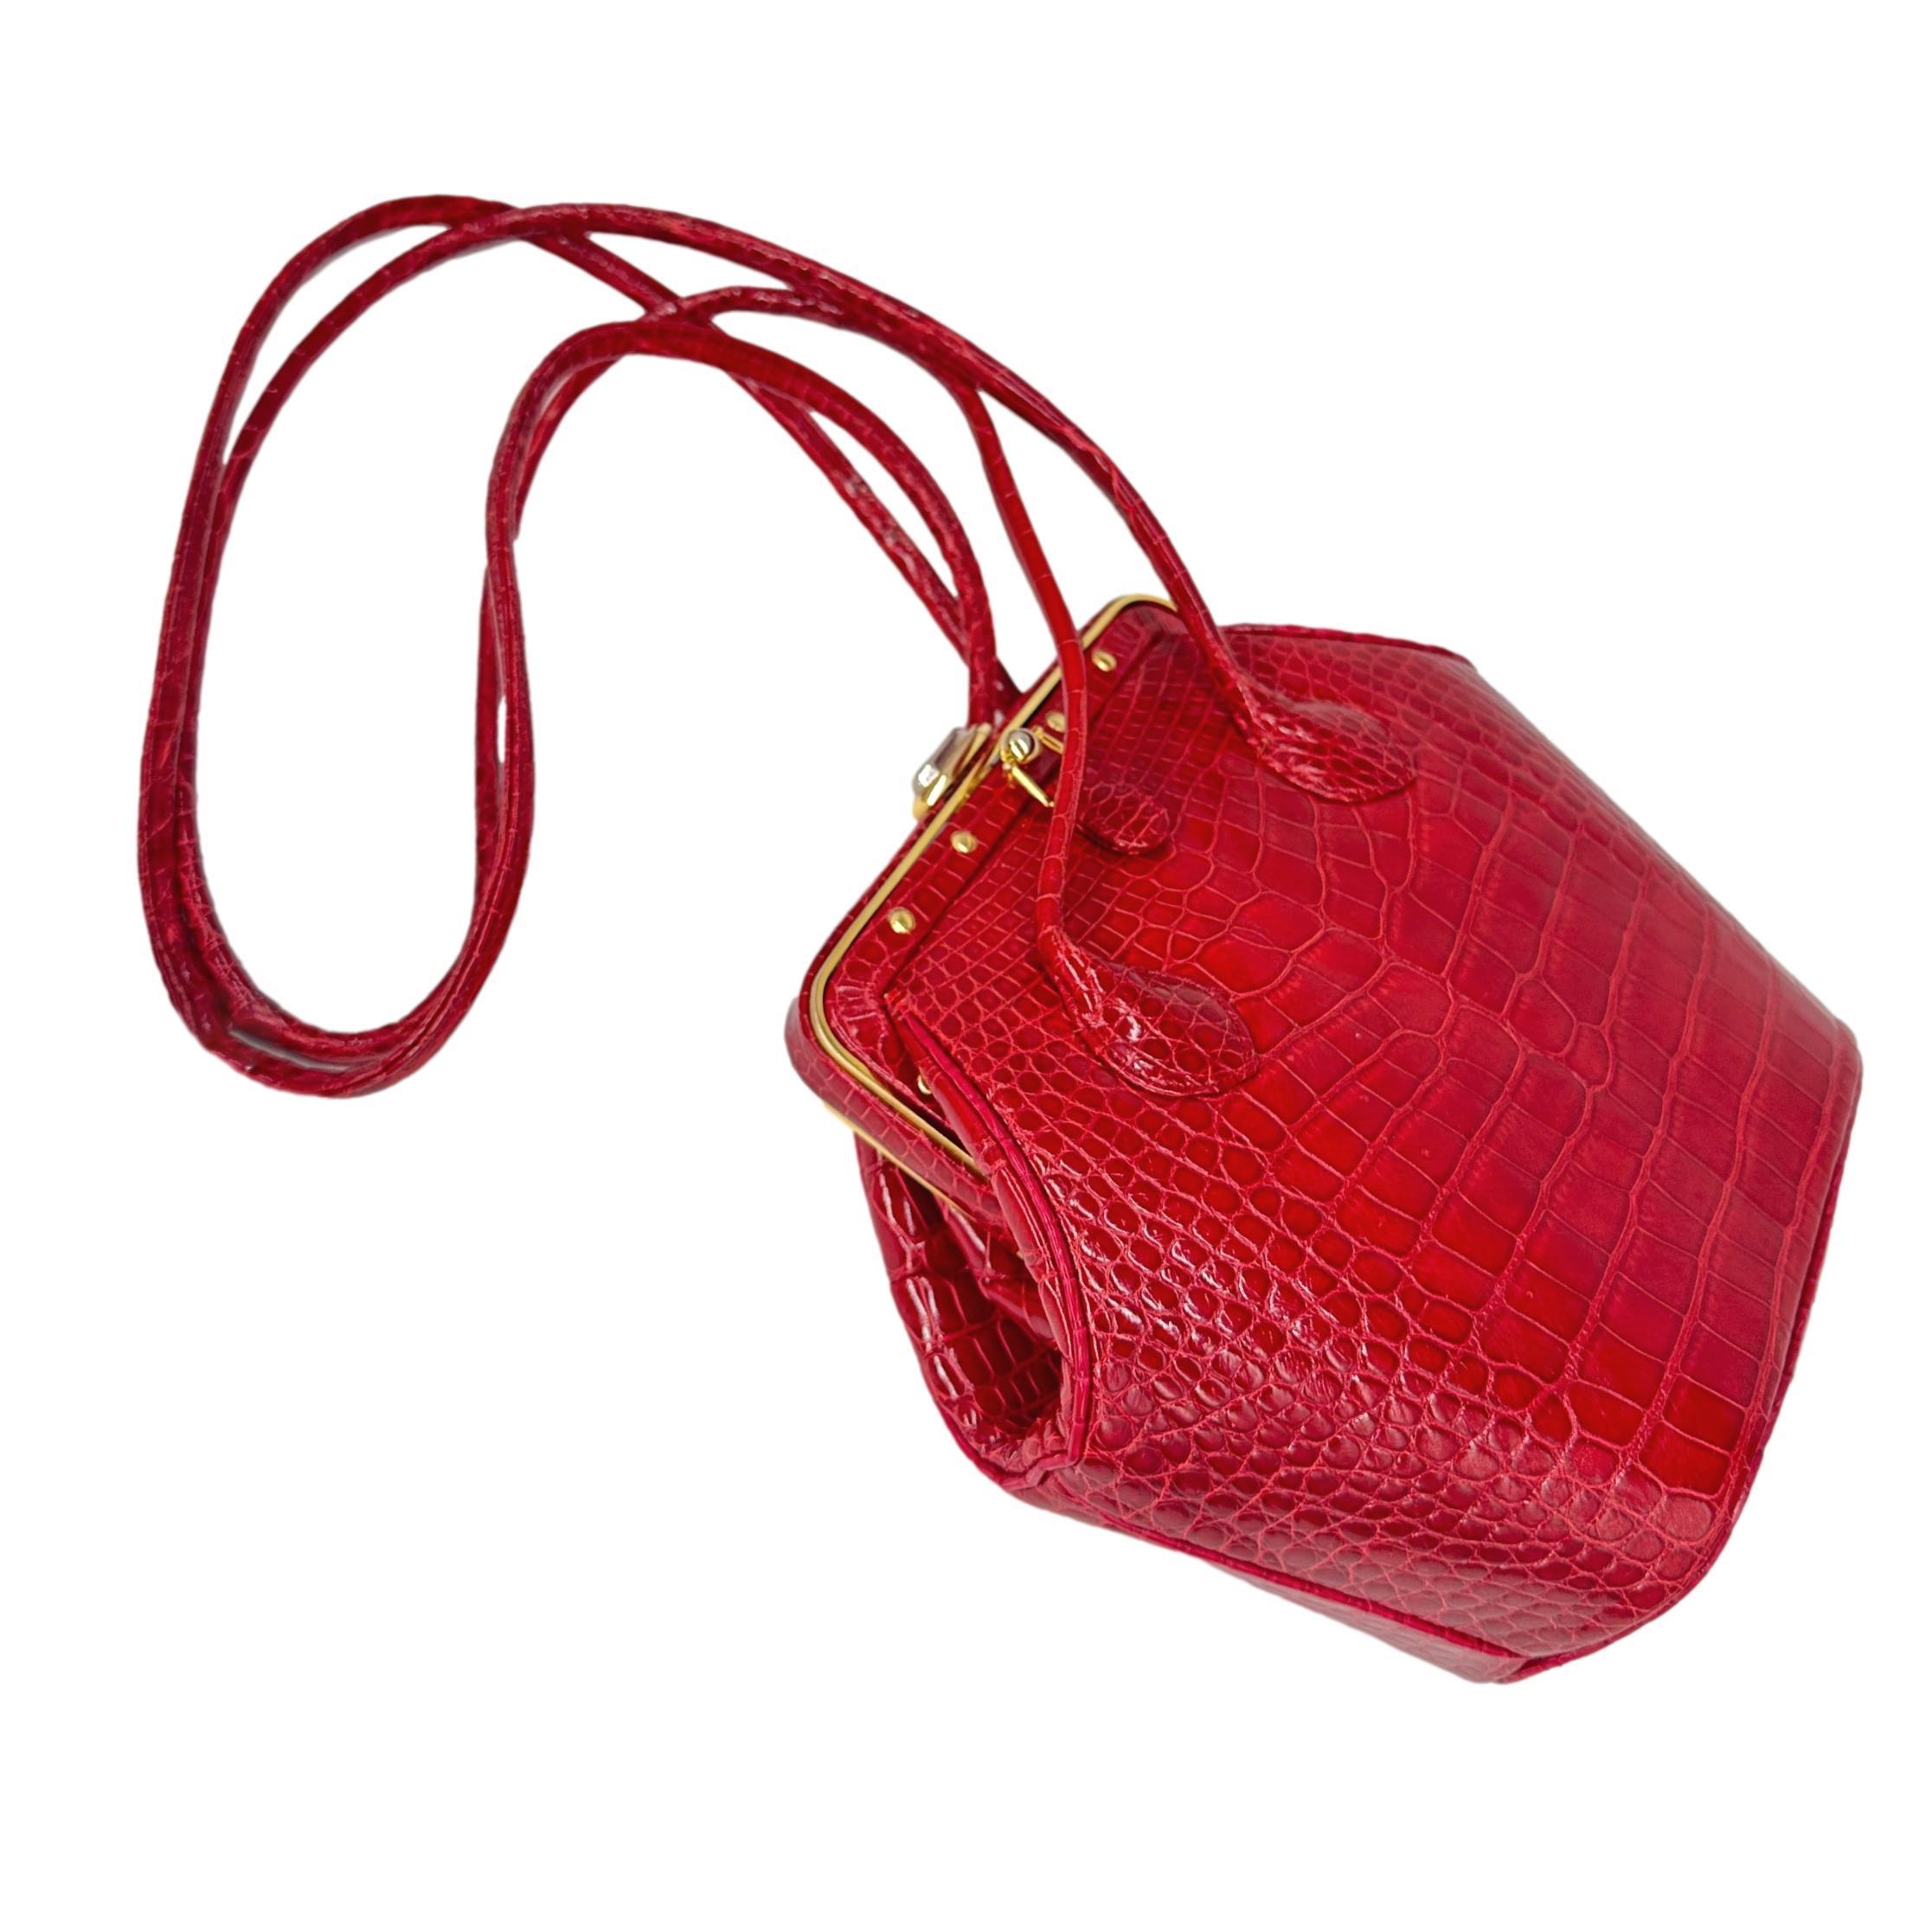 Judith Leiber Vintage Red Alligator Shoulder Minaudière Evening Bag, 1990. Exceptional and rare, this highly sought after piece of Judith Leiber history was produced between 1985 - 1990 and carried in high end department stores like Saks and